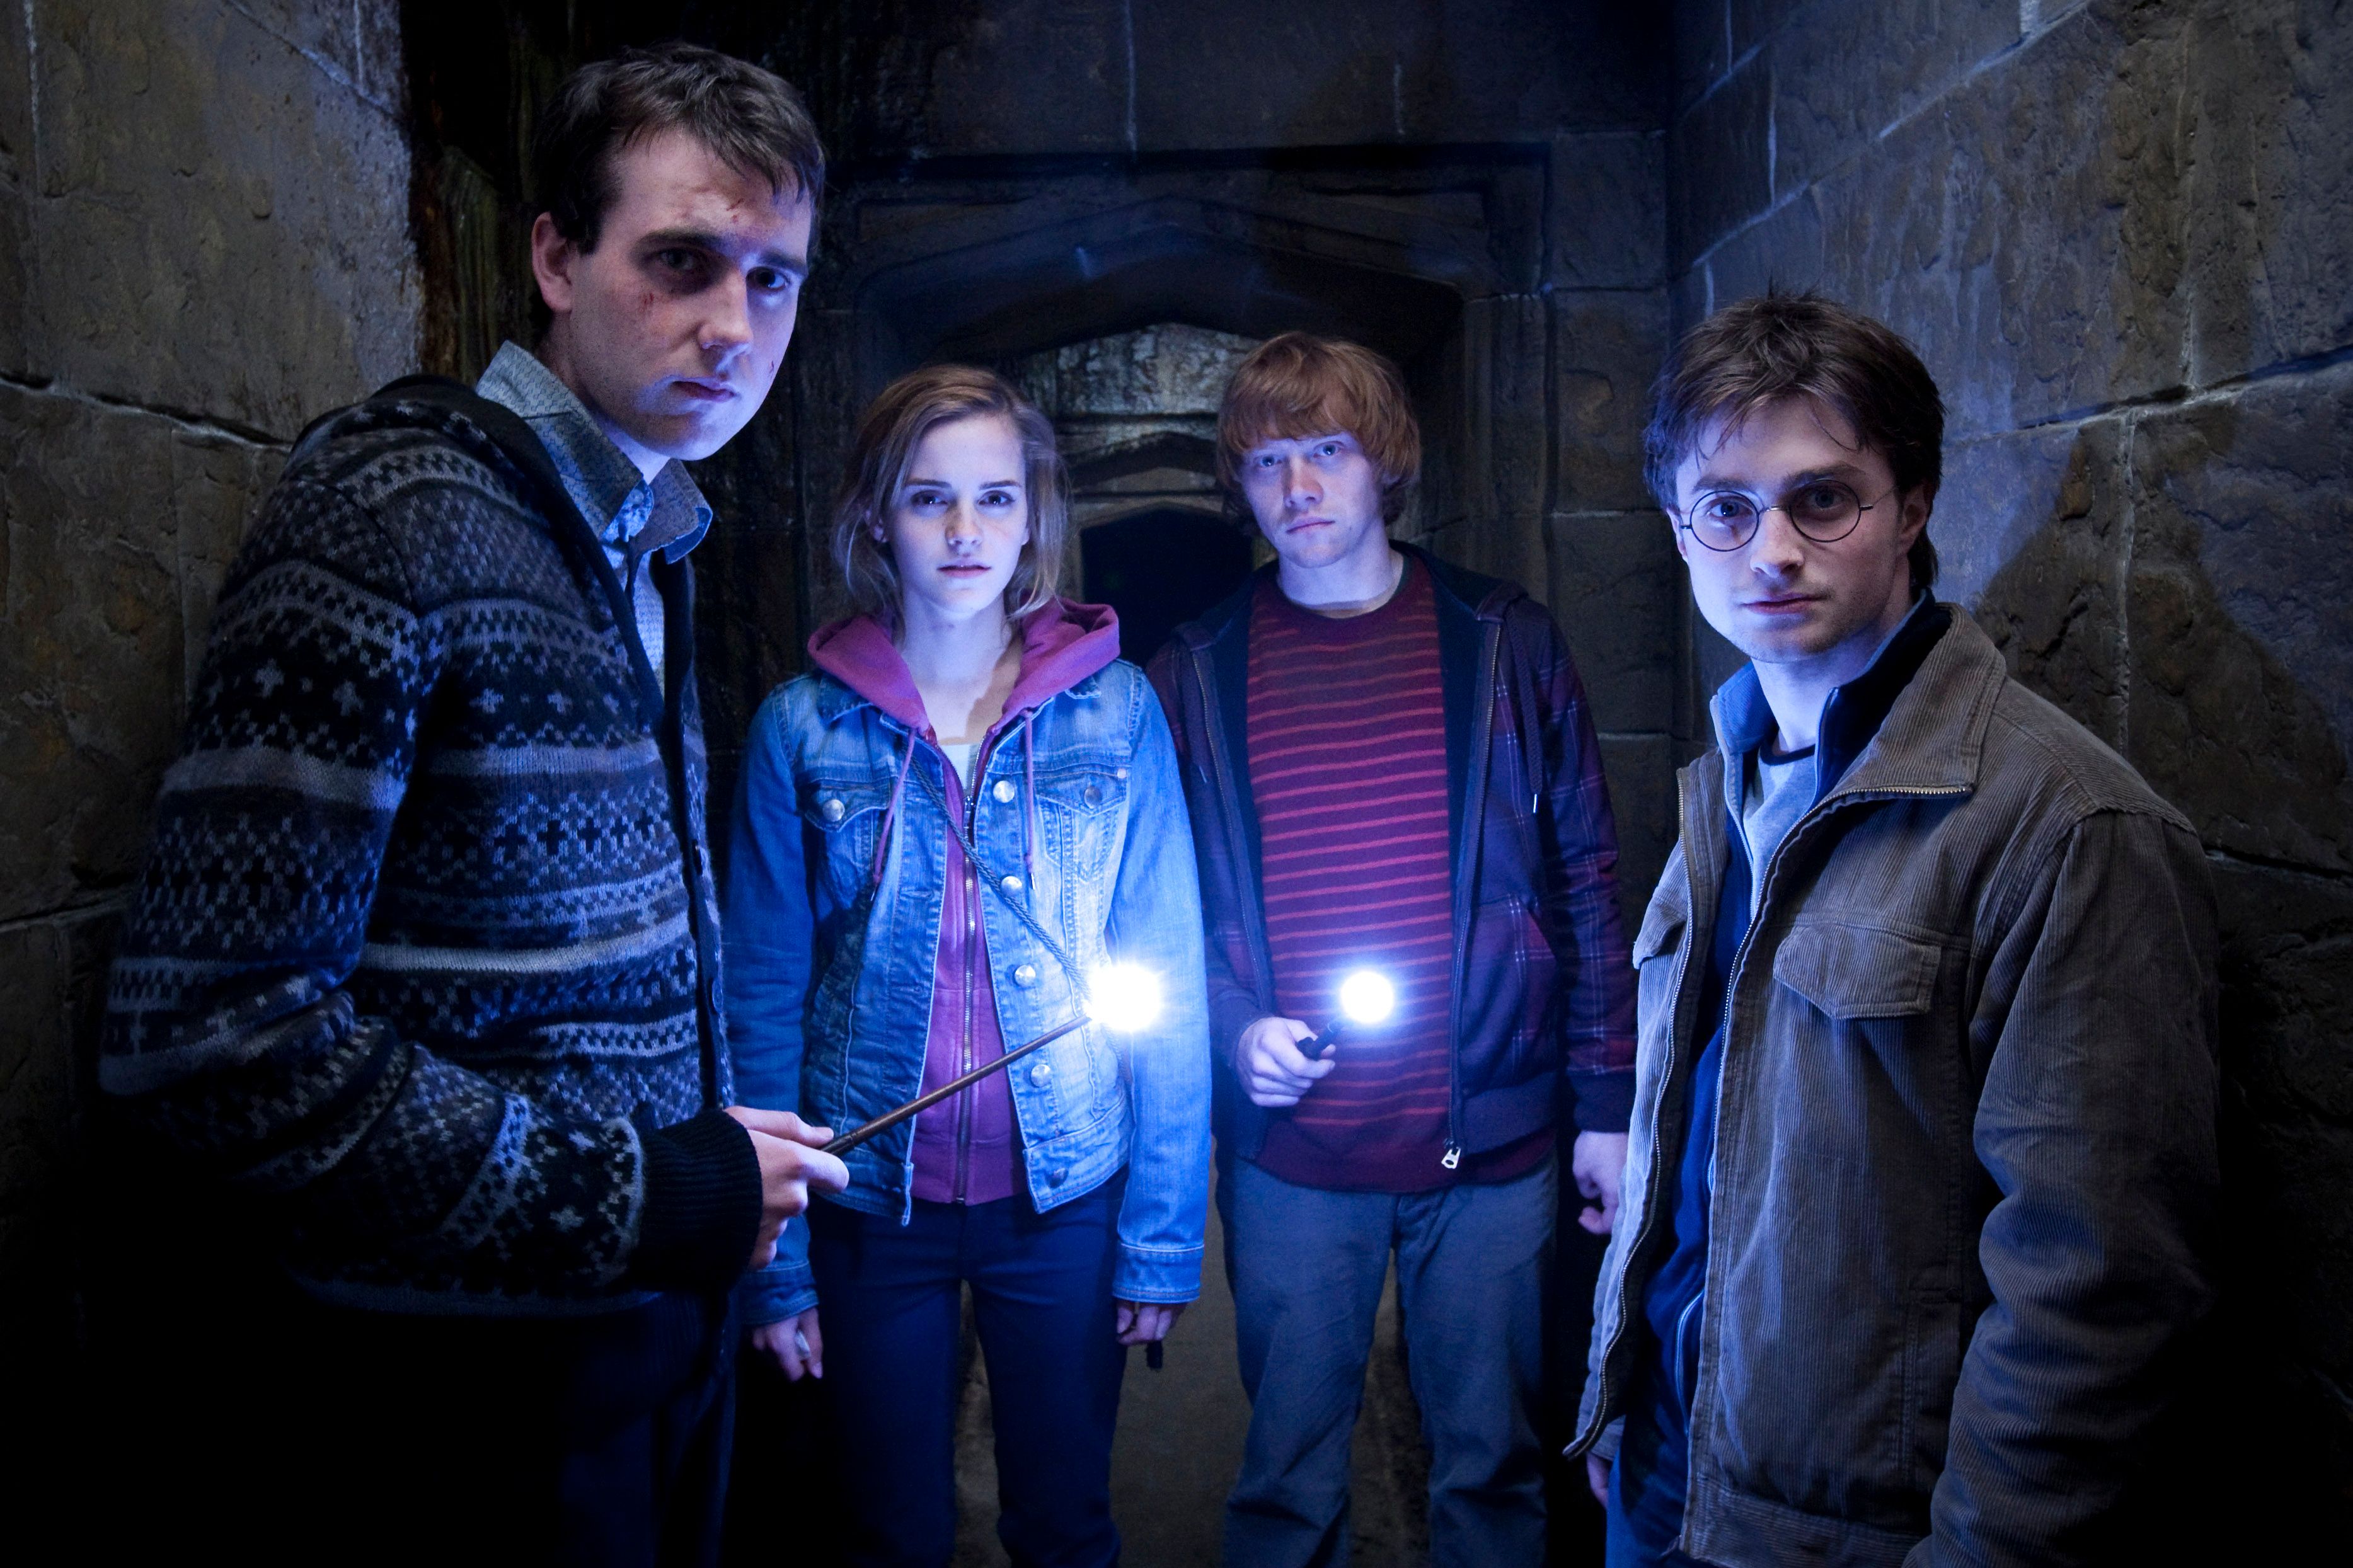 Harry Potter and the Deathly Hallows - Part 2 Photo #1